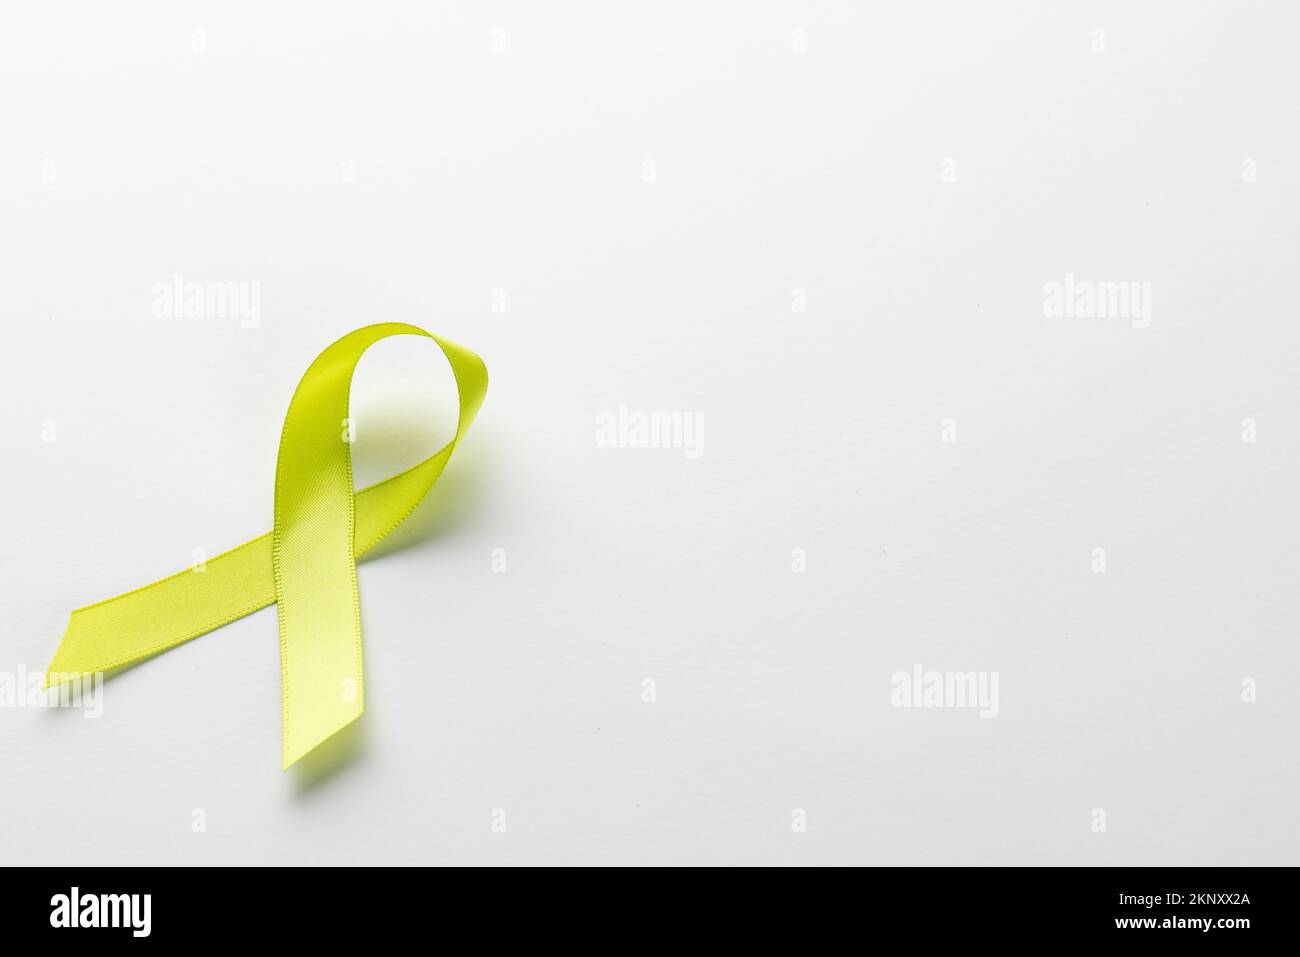 Composition of light green std health awareness ribbon, on white background with copy space Stock Photo